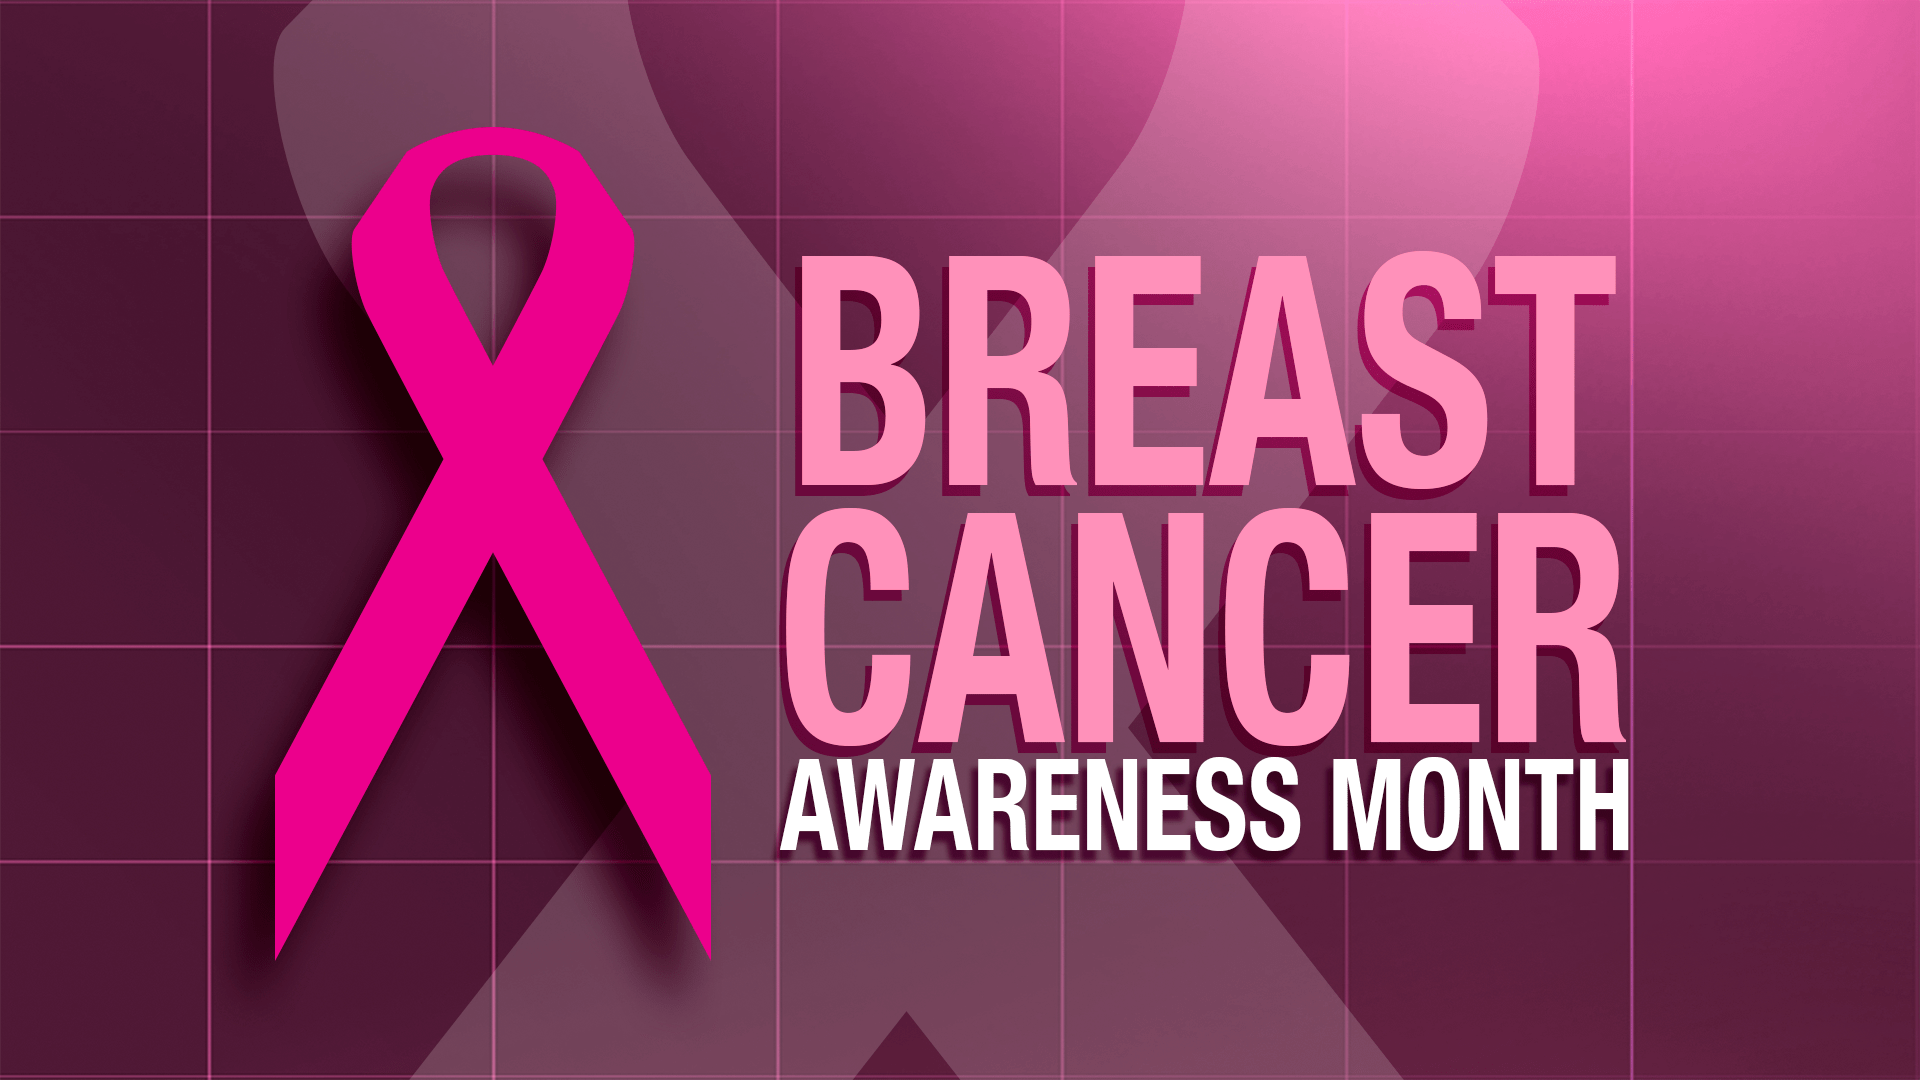 Male Breast Cancer Awareness